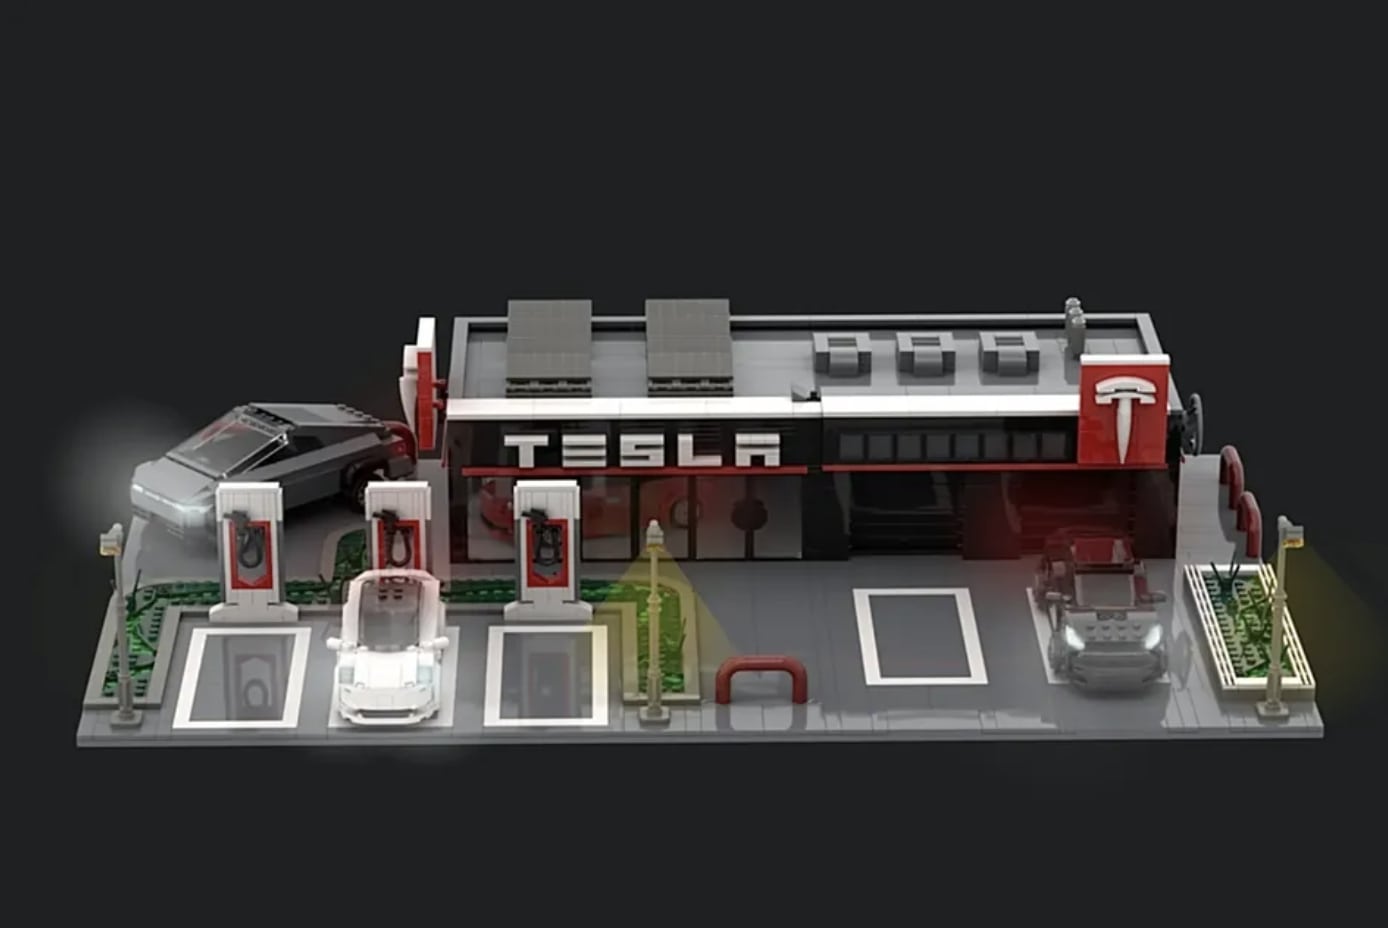 Tesla Supercharger gets Lego-fied in this crazy fan idea project